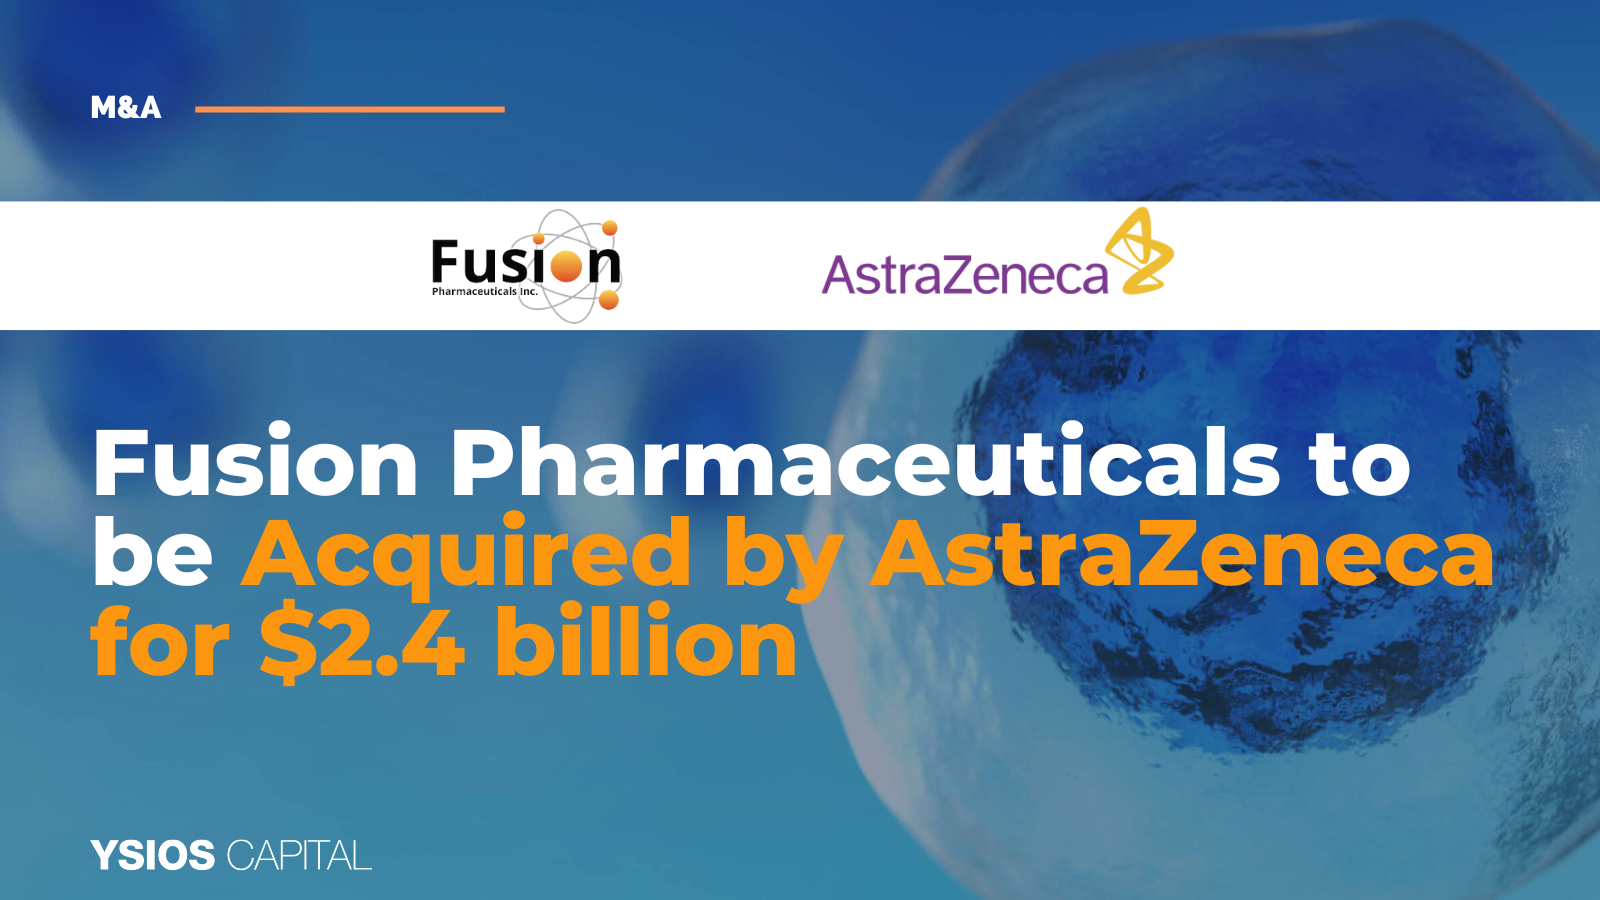 Fusion Pharmaceuticals To Be Acquired By AstraZeneca, Accelerating Development Of Next-Generation Radioconjugates To Treat Cancer<